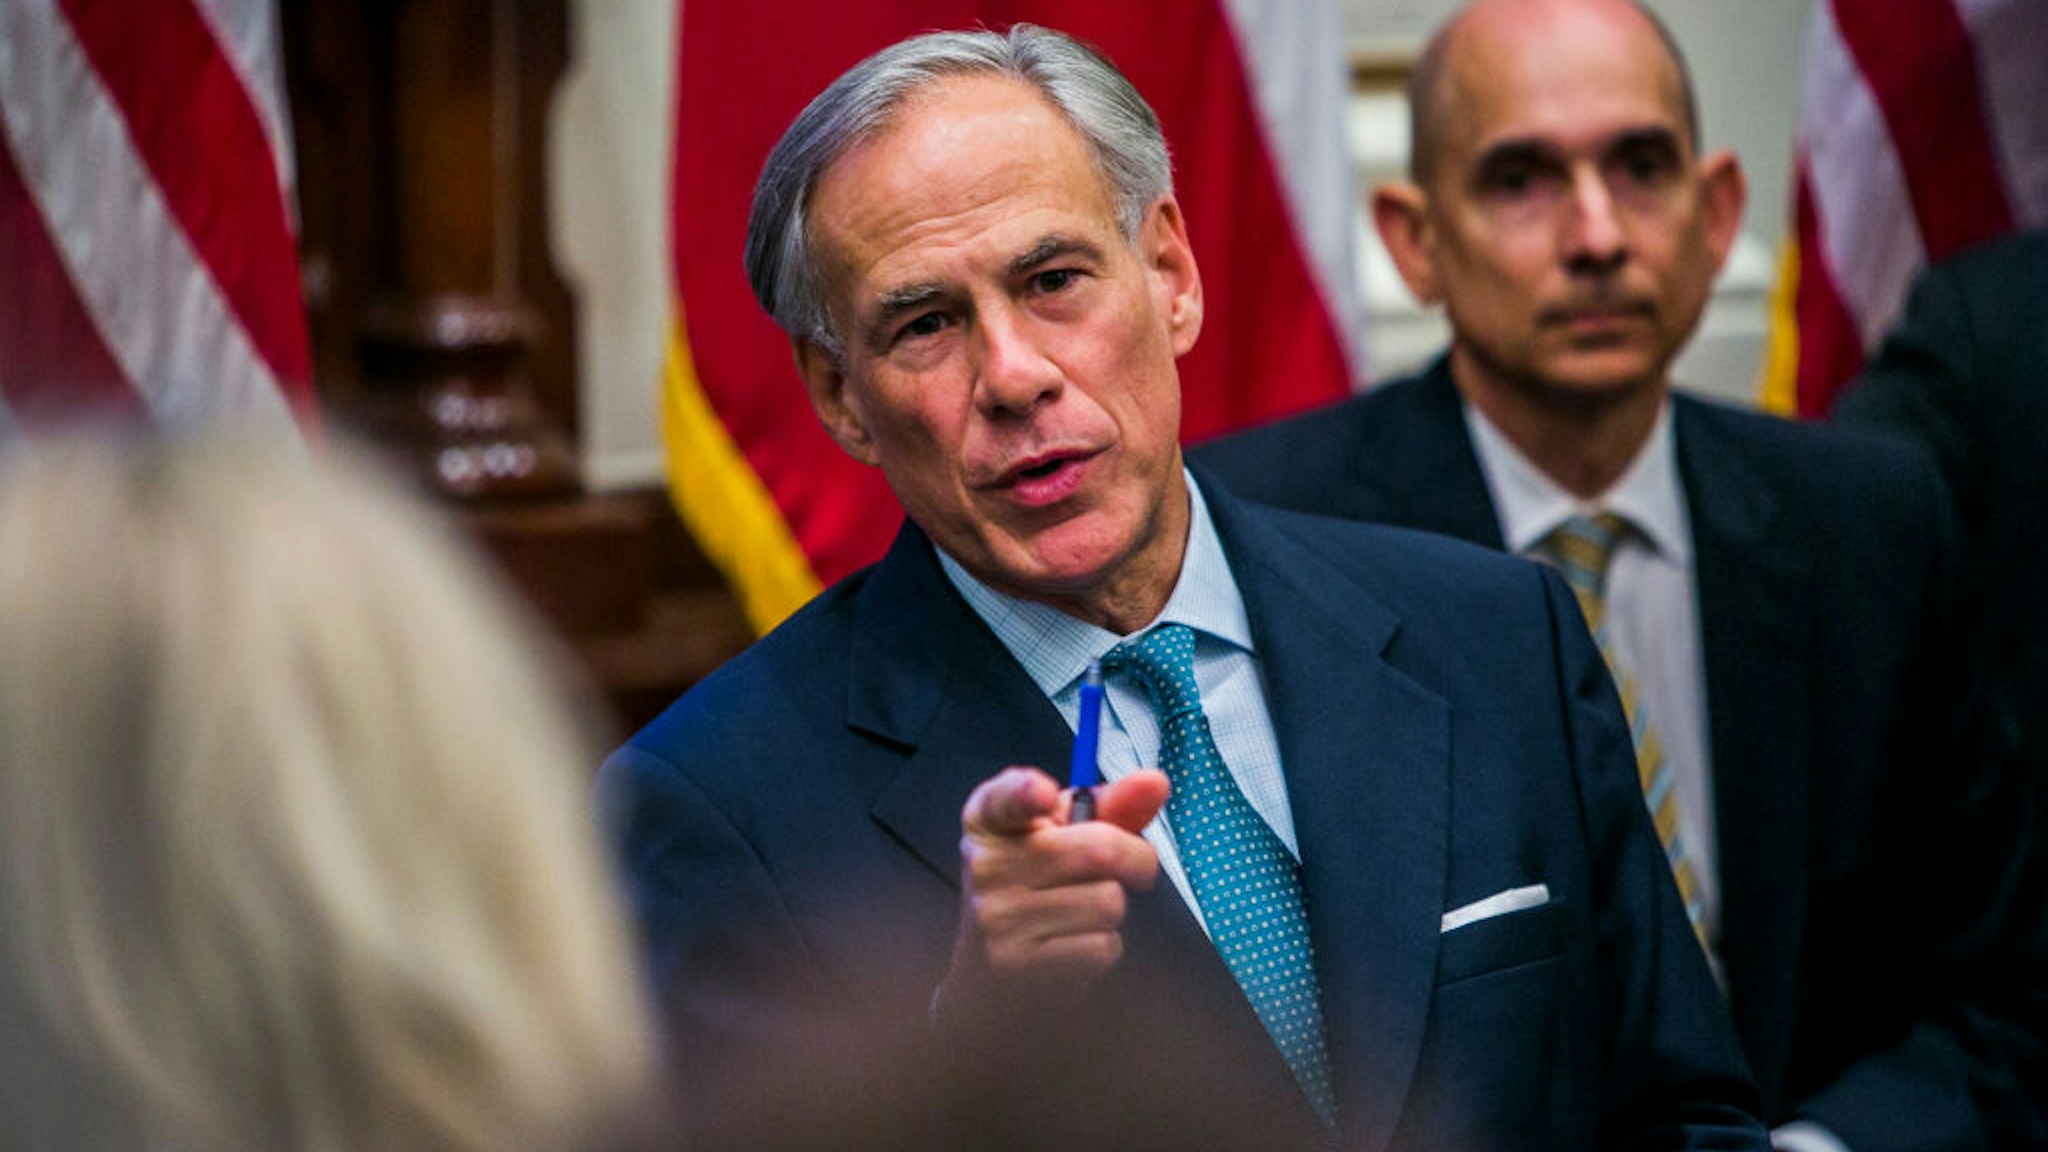 AUSTIN, TX - MAY 24: Texas Governor Greg Abbott holds a roundtable discussion with victims, family, and friends affected by the Santa Fe, Texas school shooting at the state capital on May 24, 2018 in Austin, Texas. Representatives from Sutherland Springs, Alpine, and Killeen were also invited and address the governor.